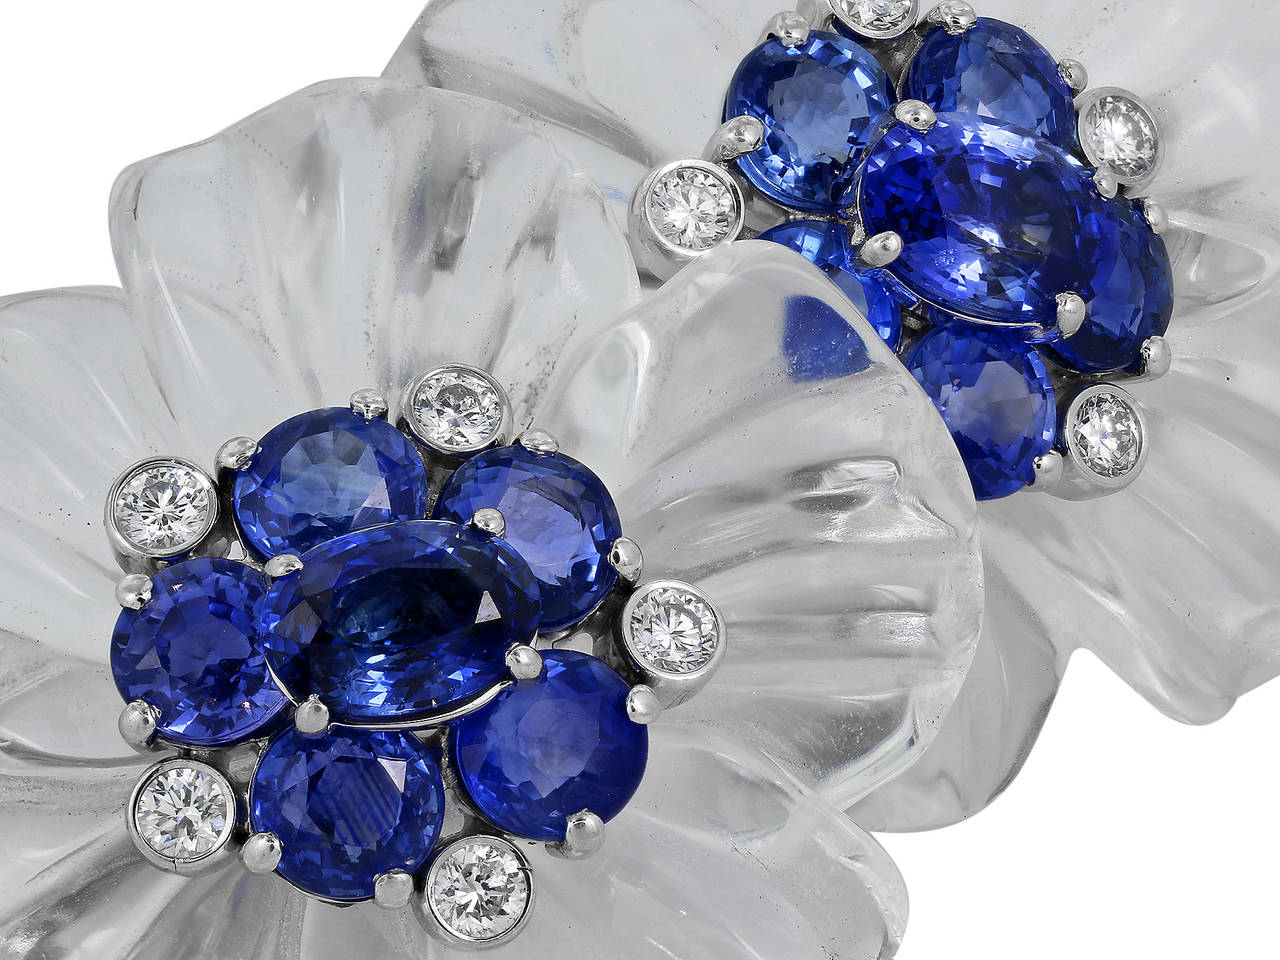 18 karat white gold carved crystal floral motif earrings consisting of 12 oval and round shaped blue sapphires having a total weight of 8.00 carats set with 10 bezel set round brilliant cut diamonds having a total weight of .60 carats, signed Aletto